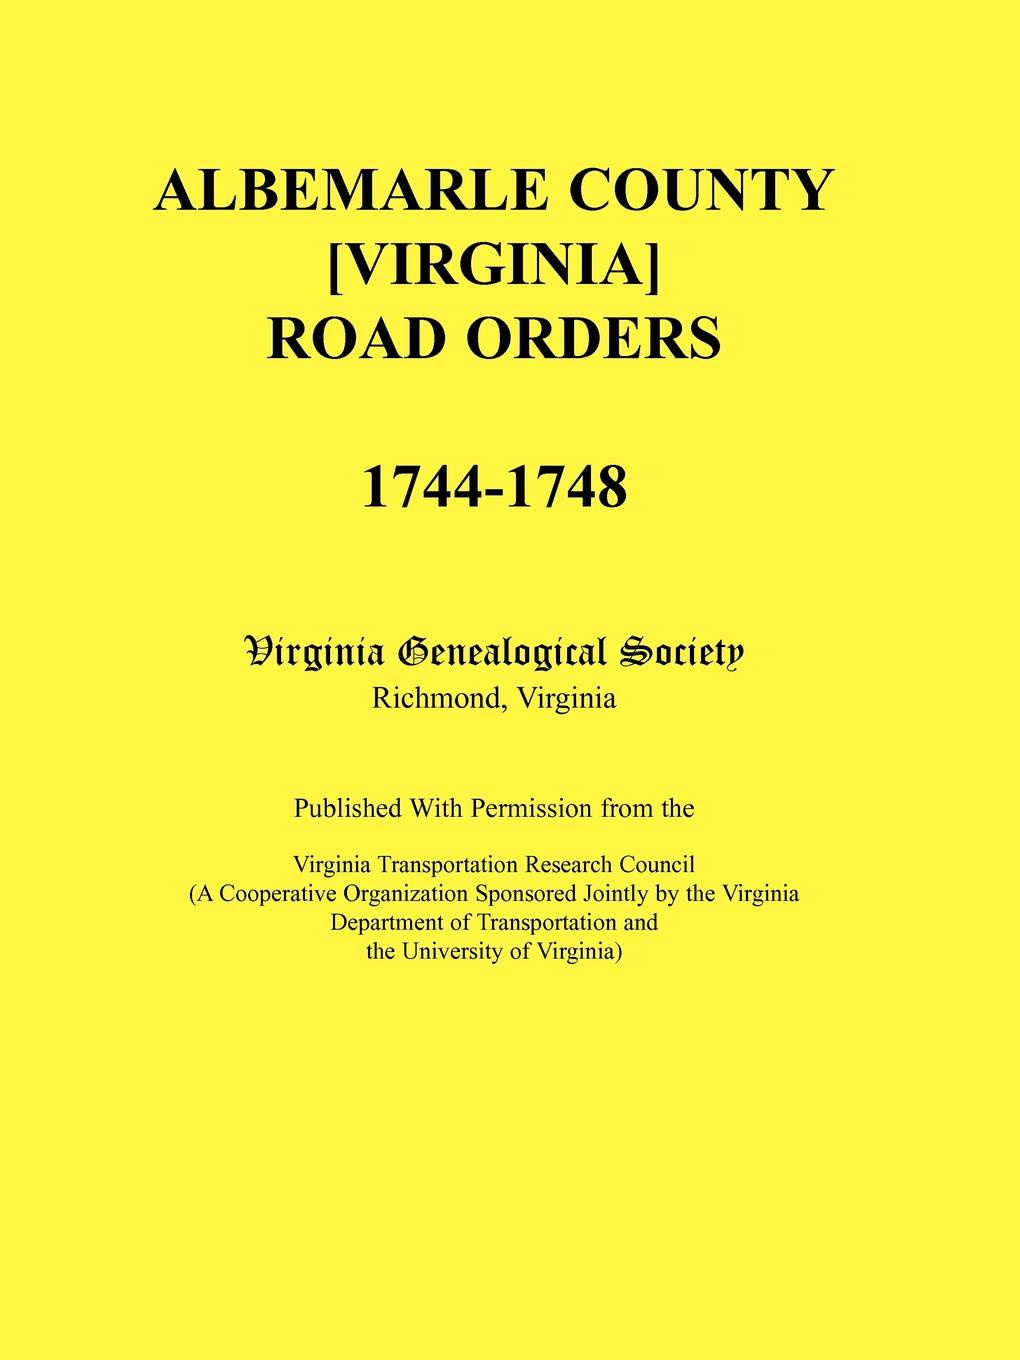 Albemarle County .Virginia. Road Orders, 1744-1748. Published With Permission from the Virginia Transportation Research Council (A Cooperative Organization Sponsored Jointly by the Virginia Department of Transportation and the University of Virginia)